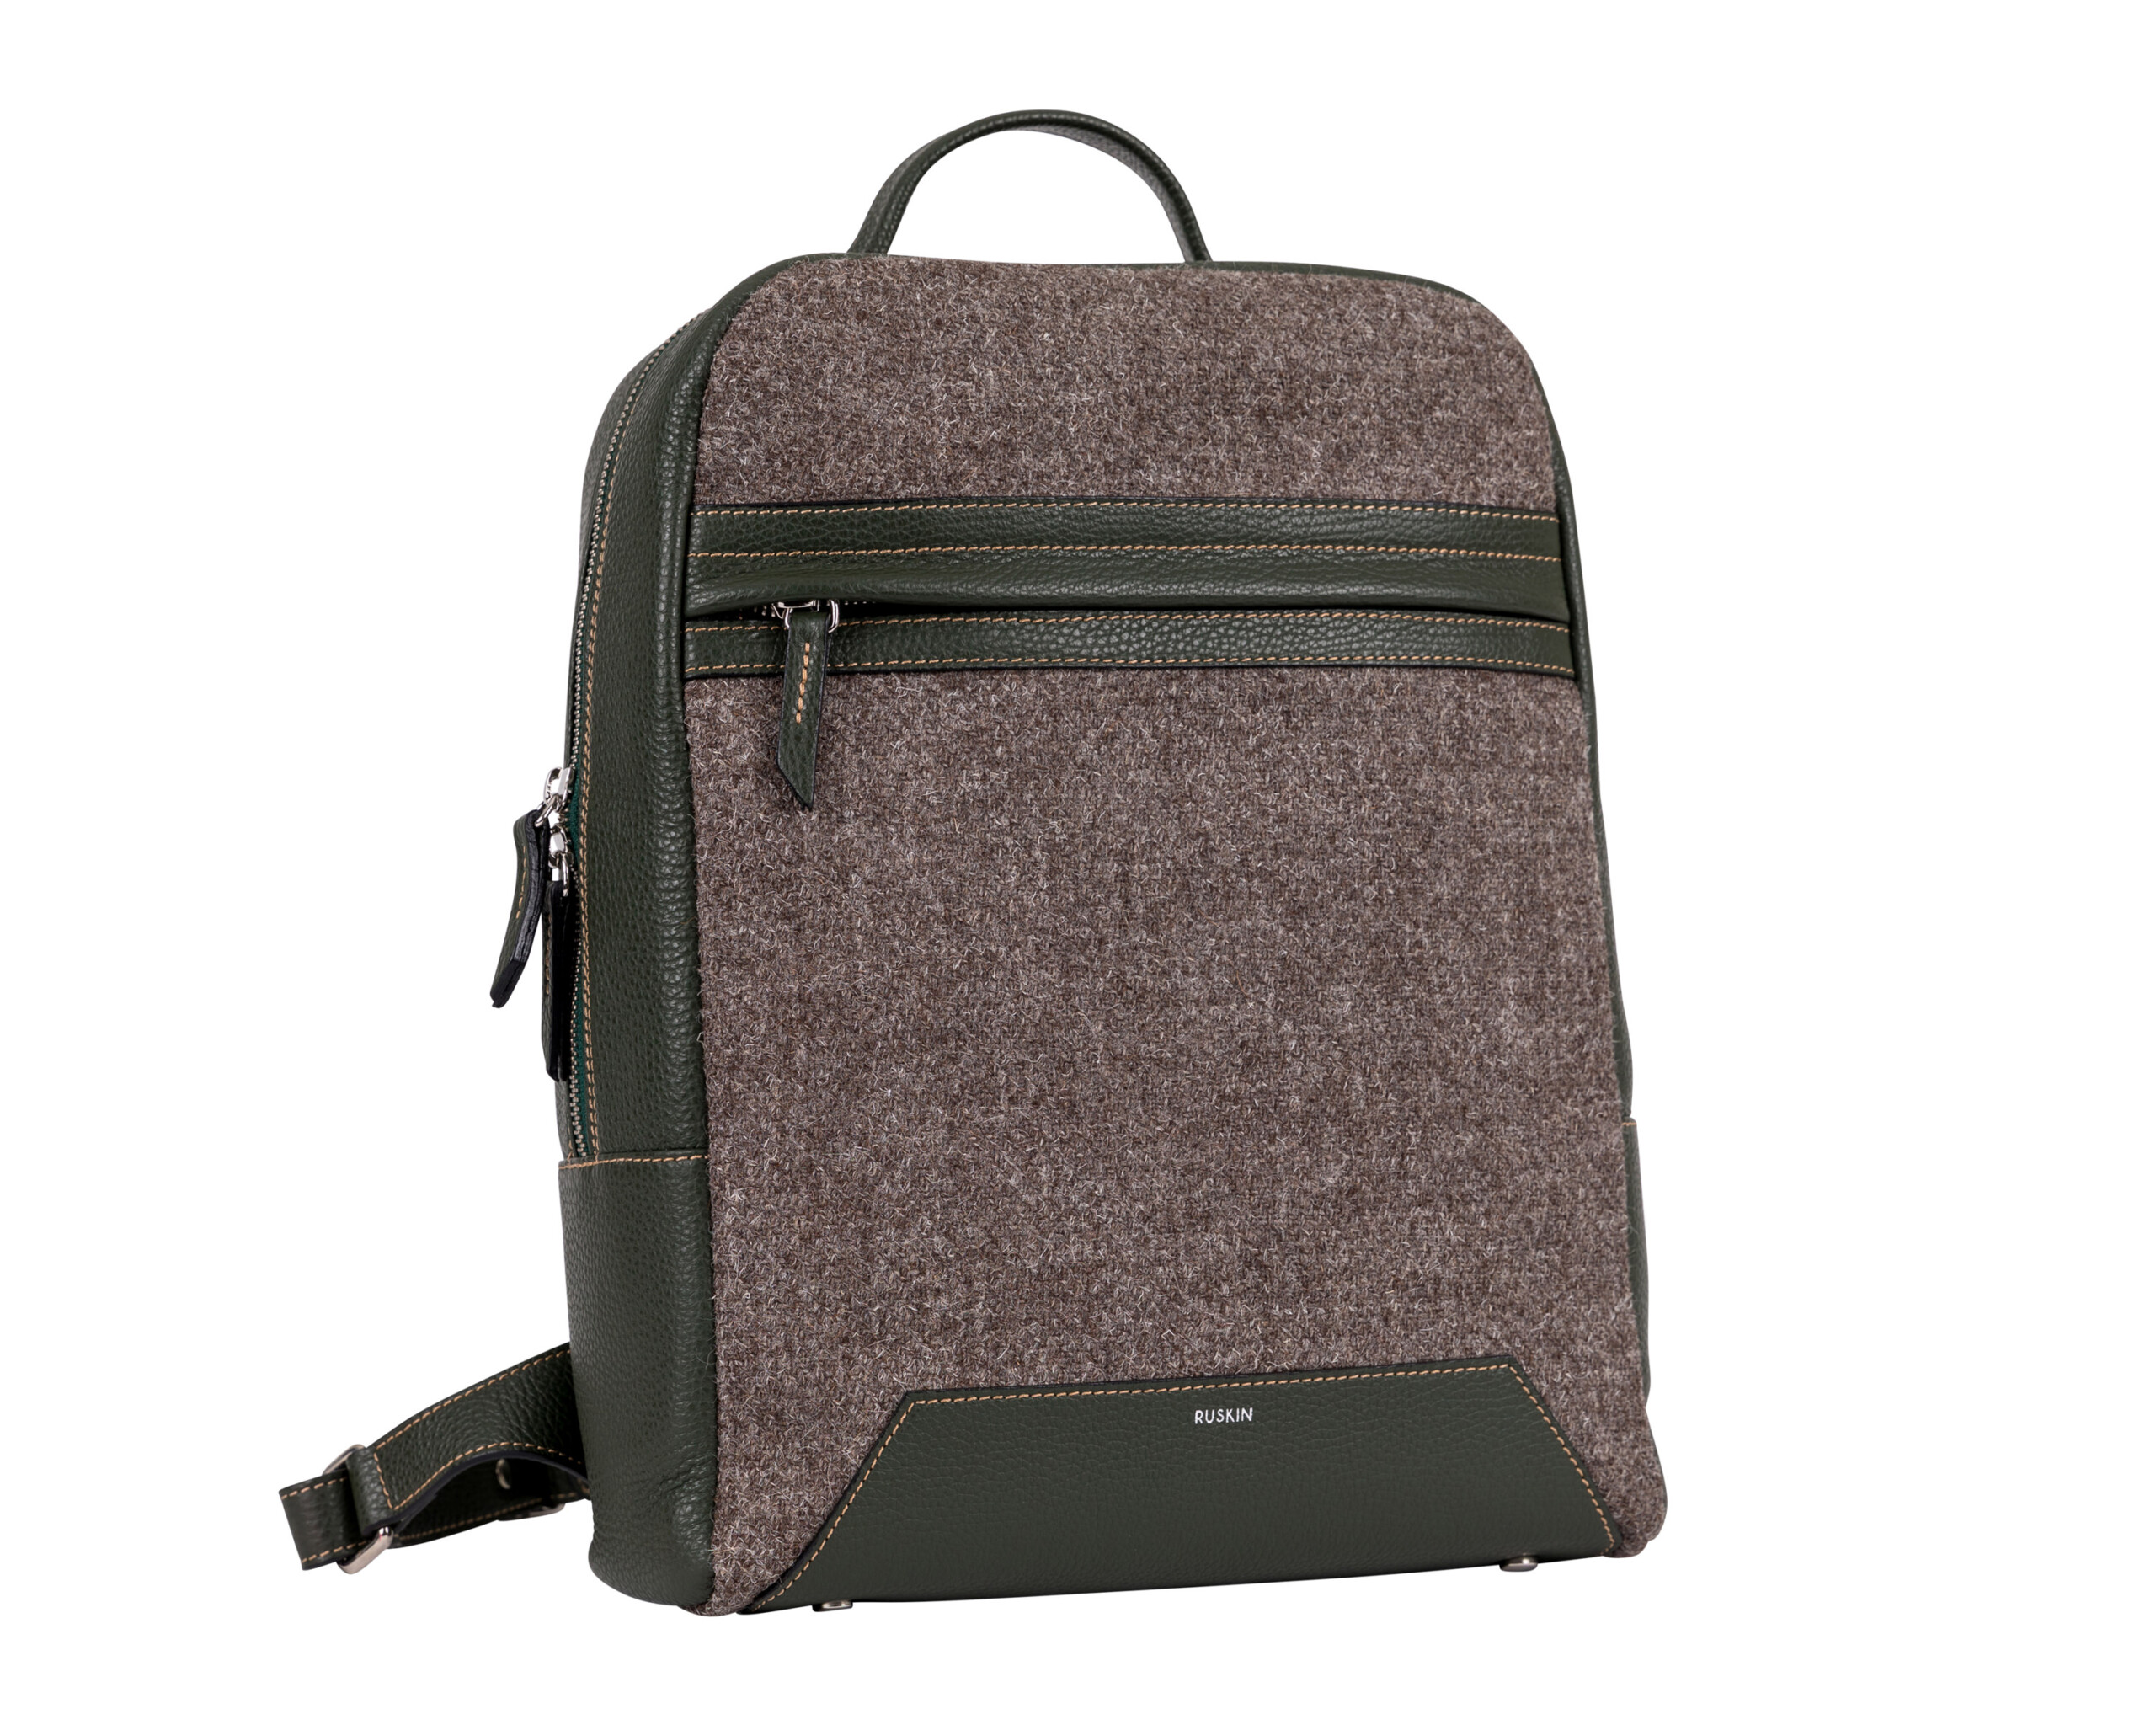 Backpack Product Photography